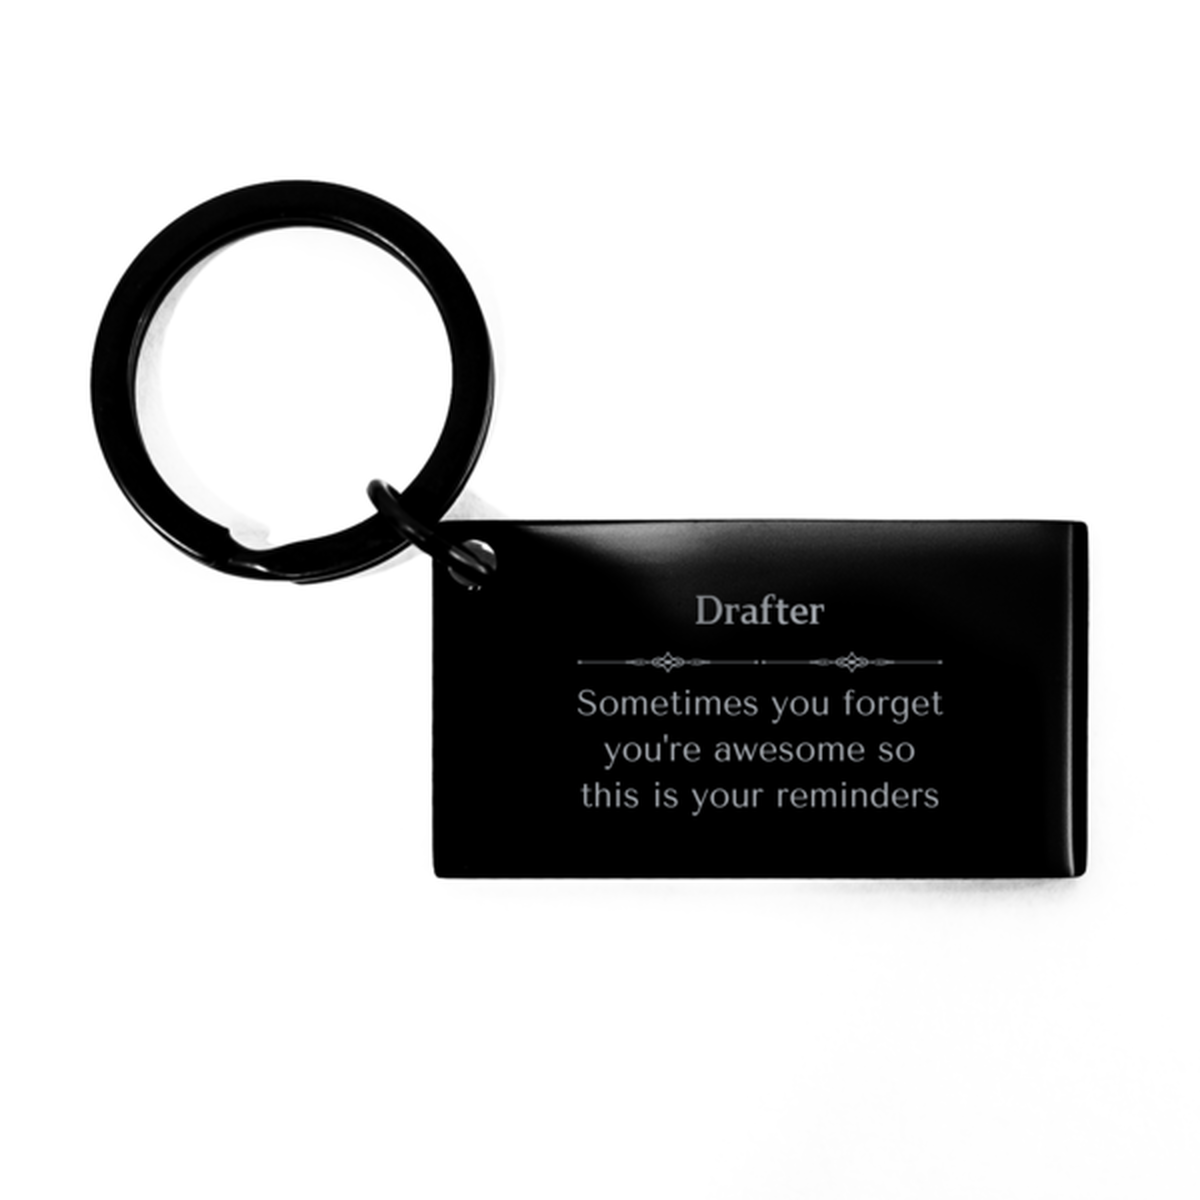 Sentimental Drafter Keychain, Historian Sometimes you forget you're awesome so this is your reminders, Graduation Christmas Birthday Gifts for Drafter, Men, Women, Coworkers